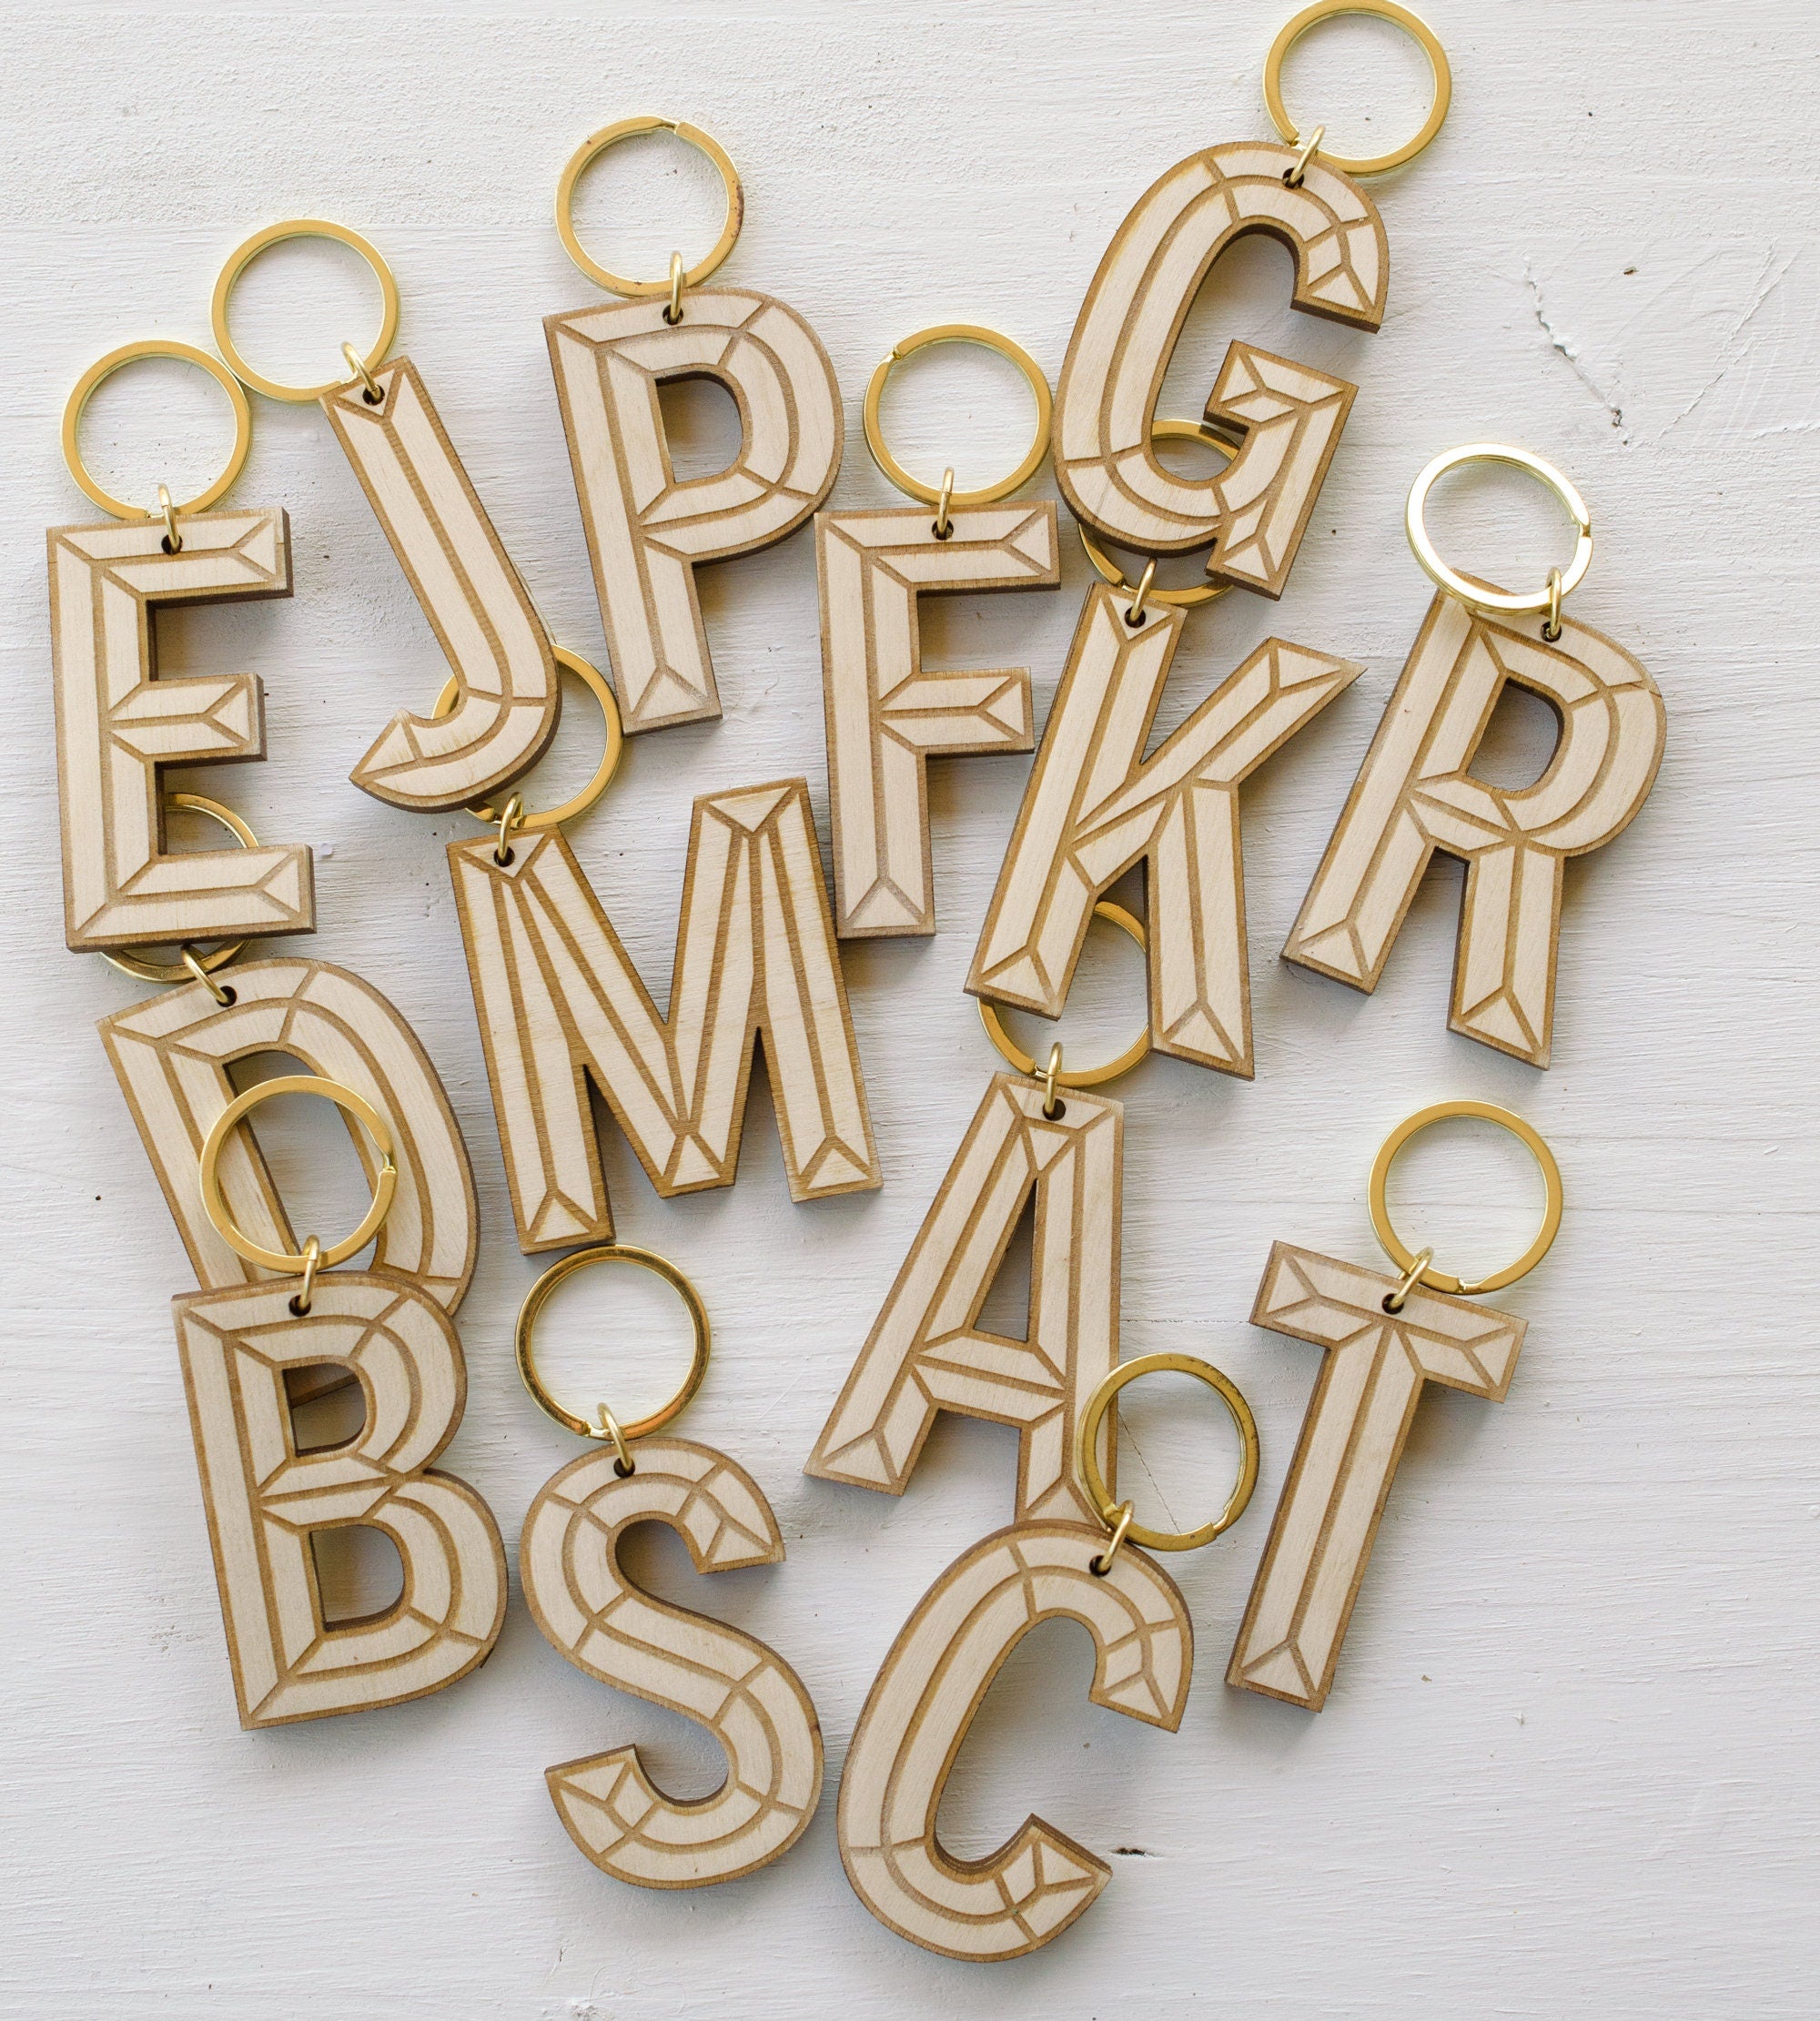 Create Your Own Hand Print Keychain Kit - Unique Gifts - Pikkii in 2023